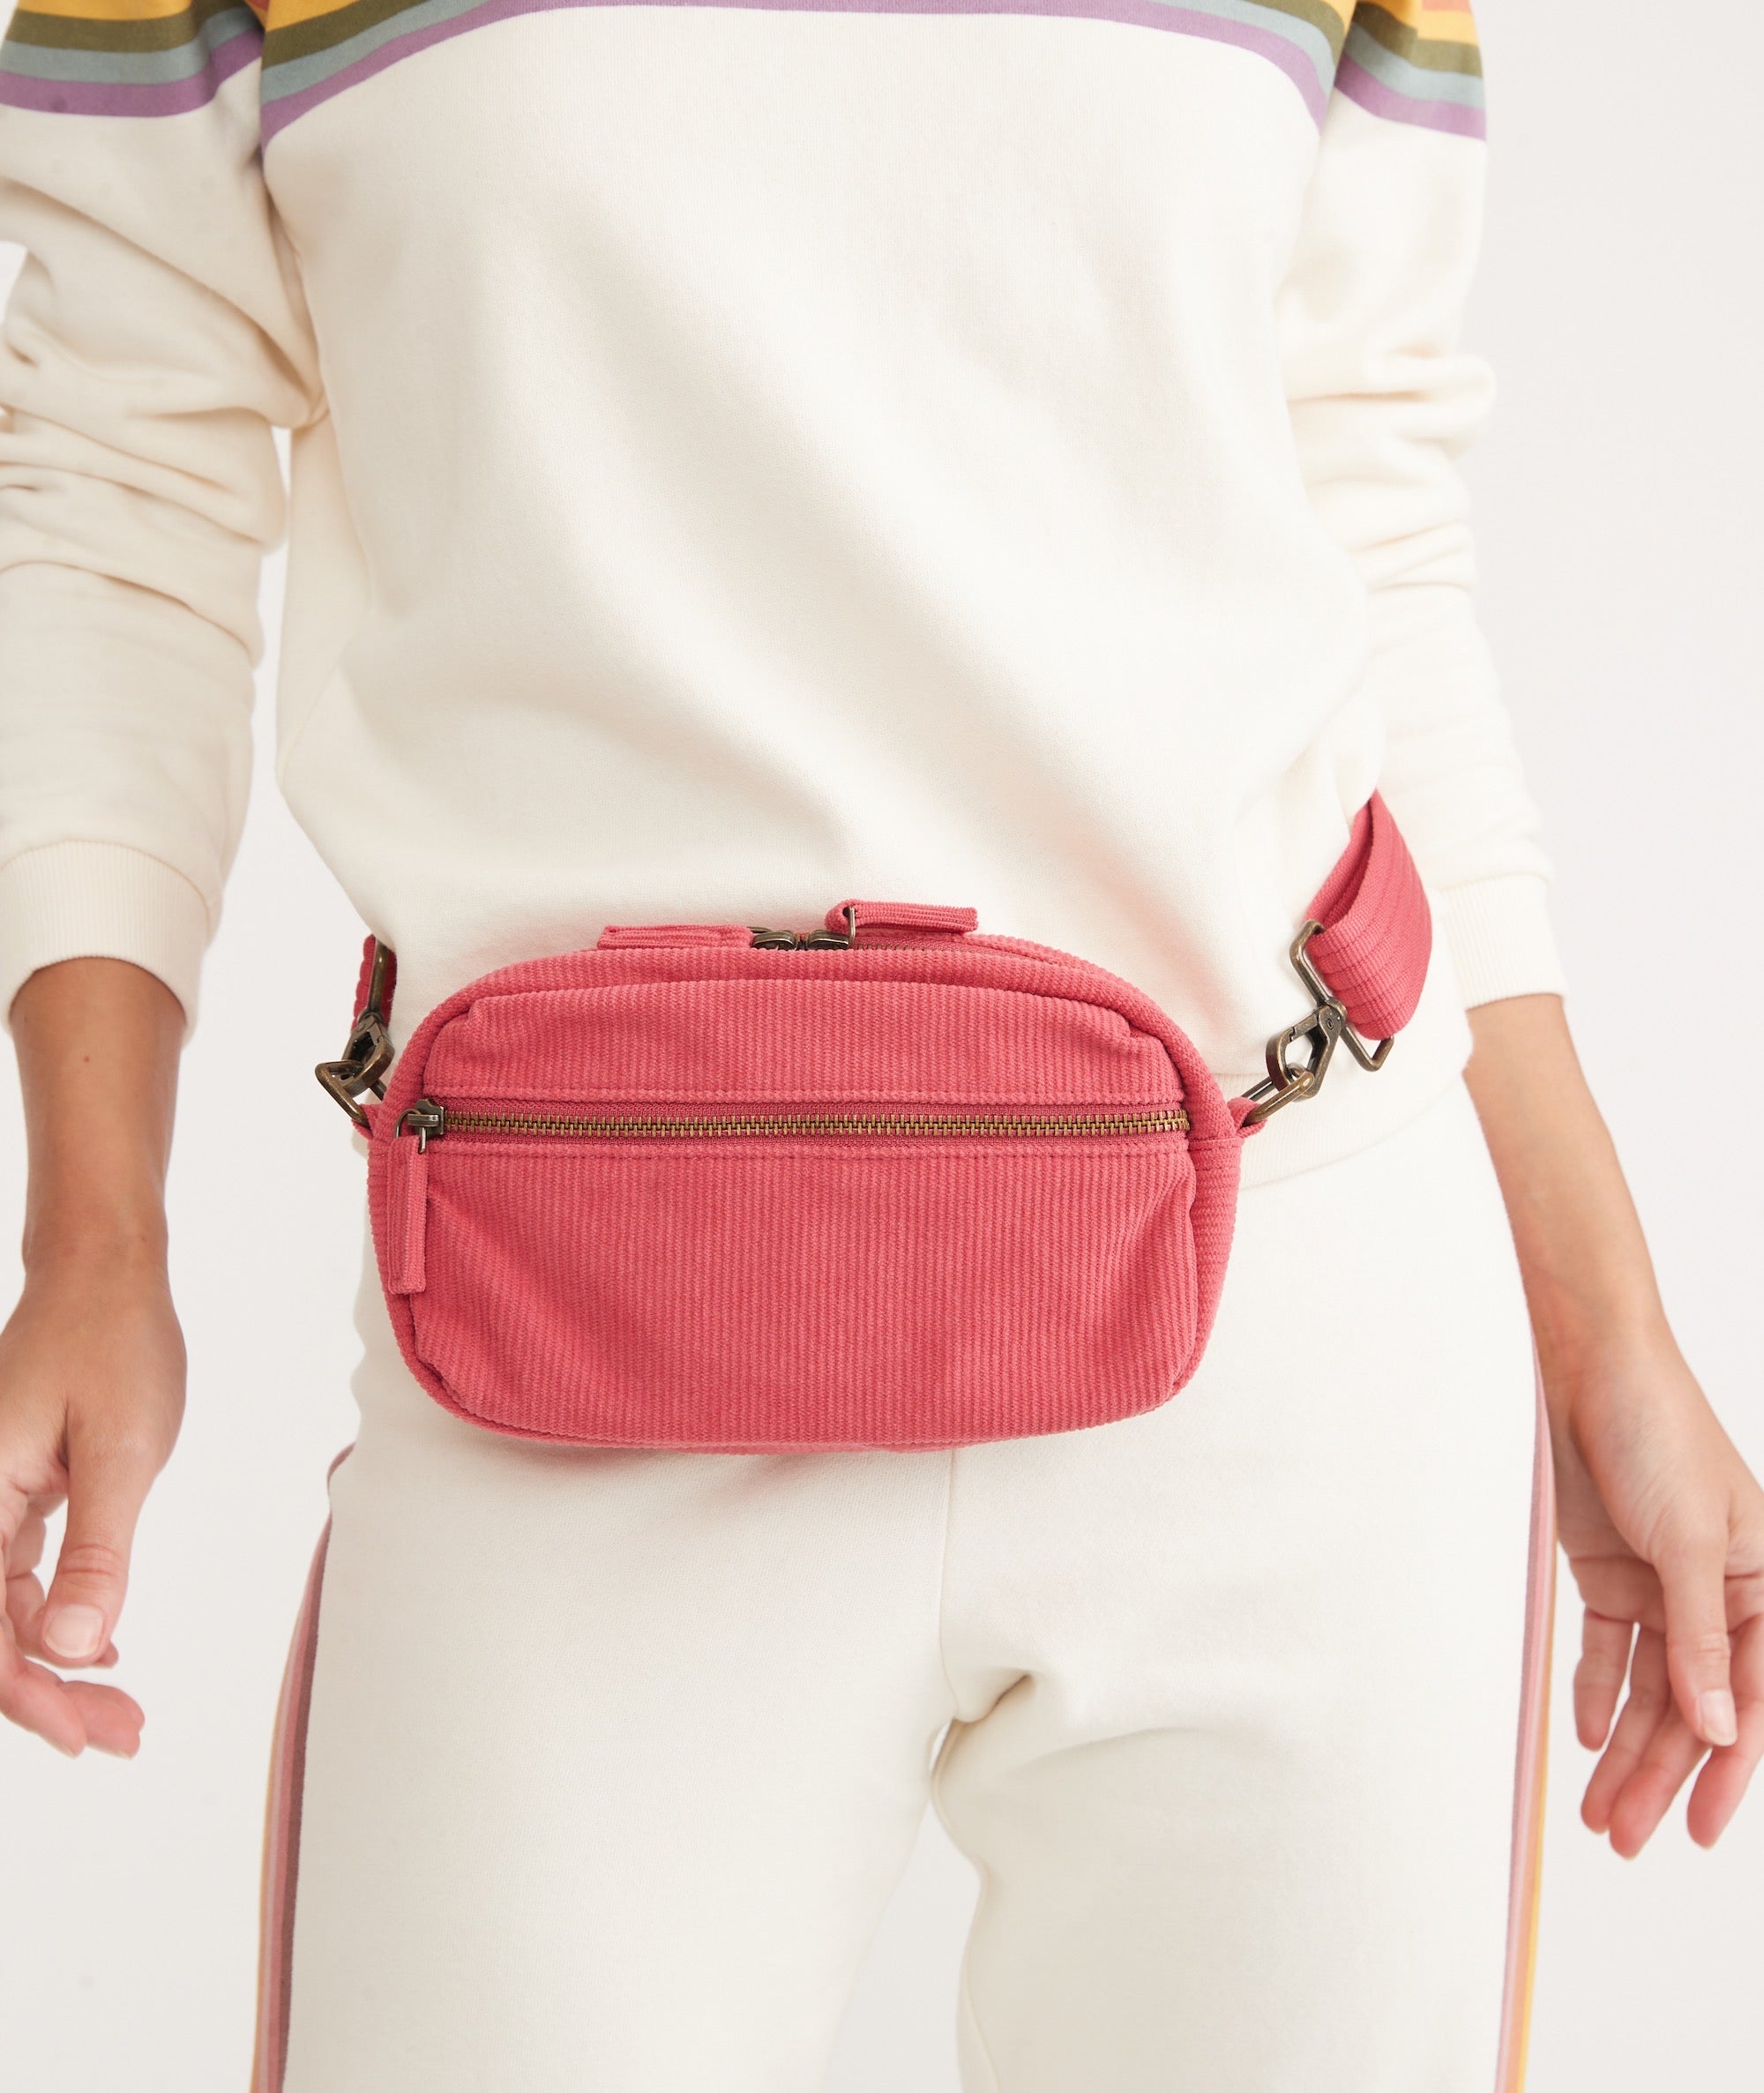 Women's Fanny Pack | Seasonless Natural | One Size by Marine Layer